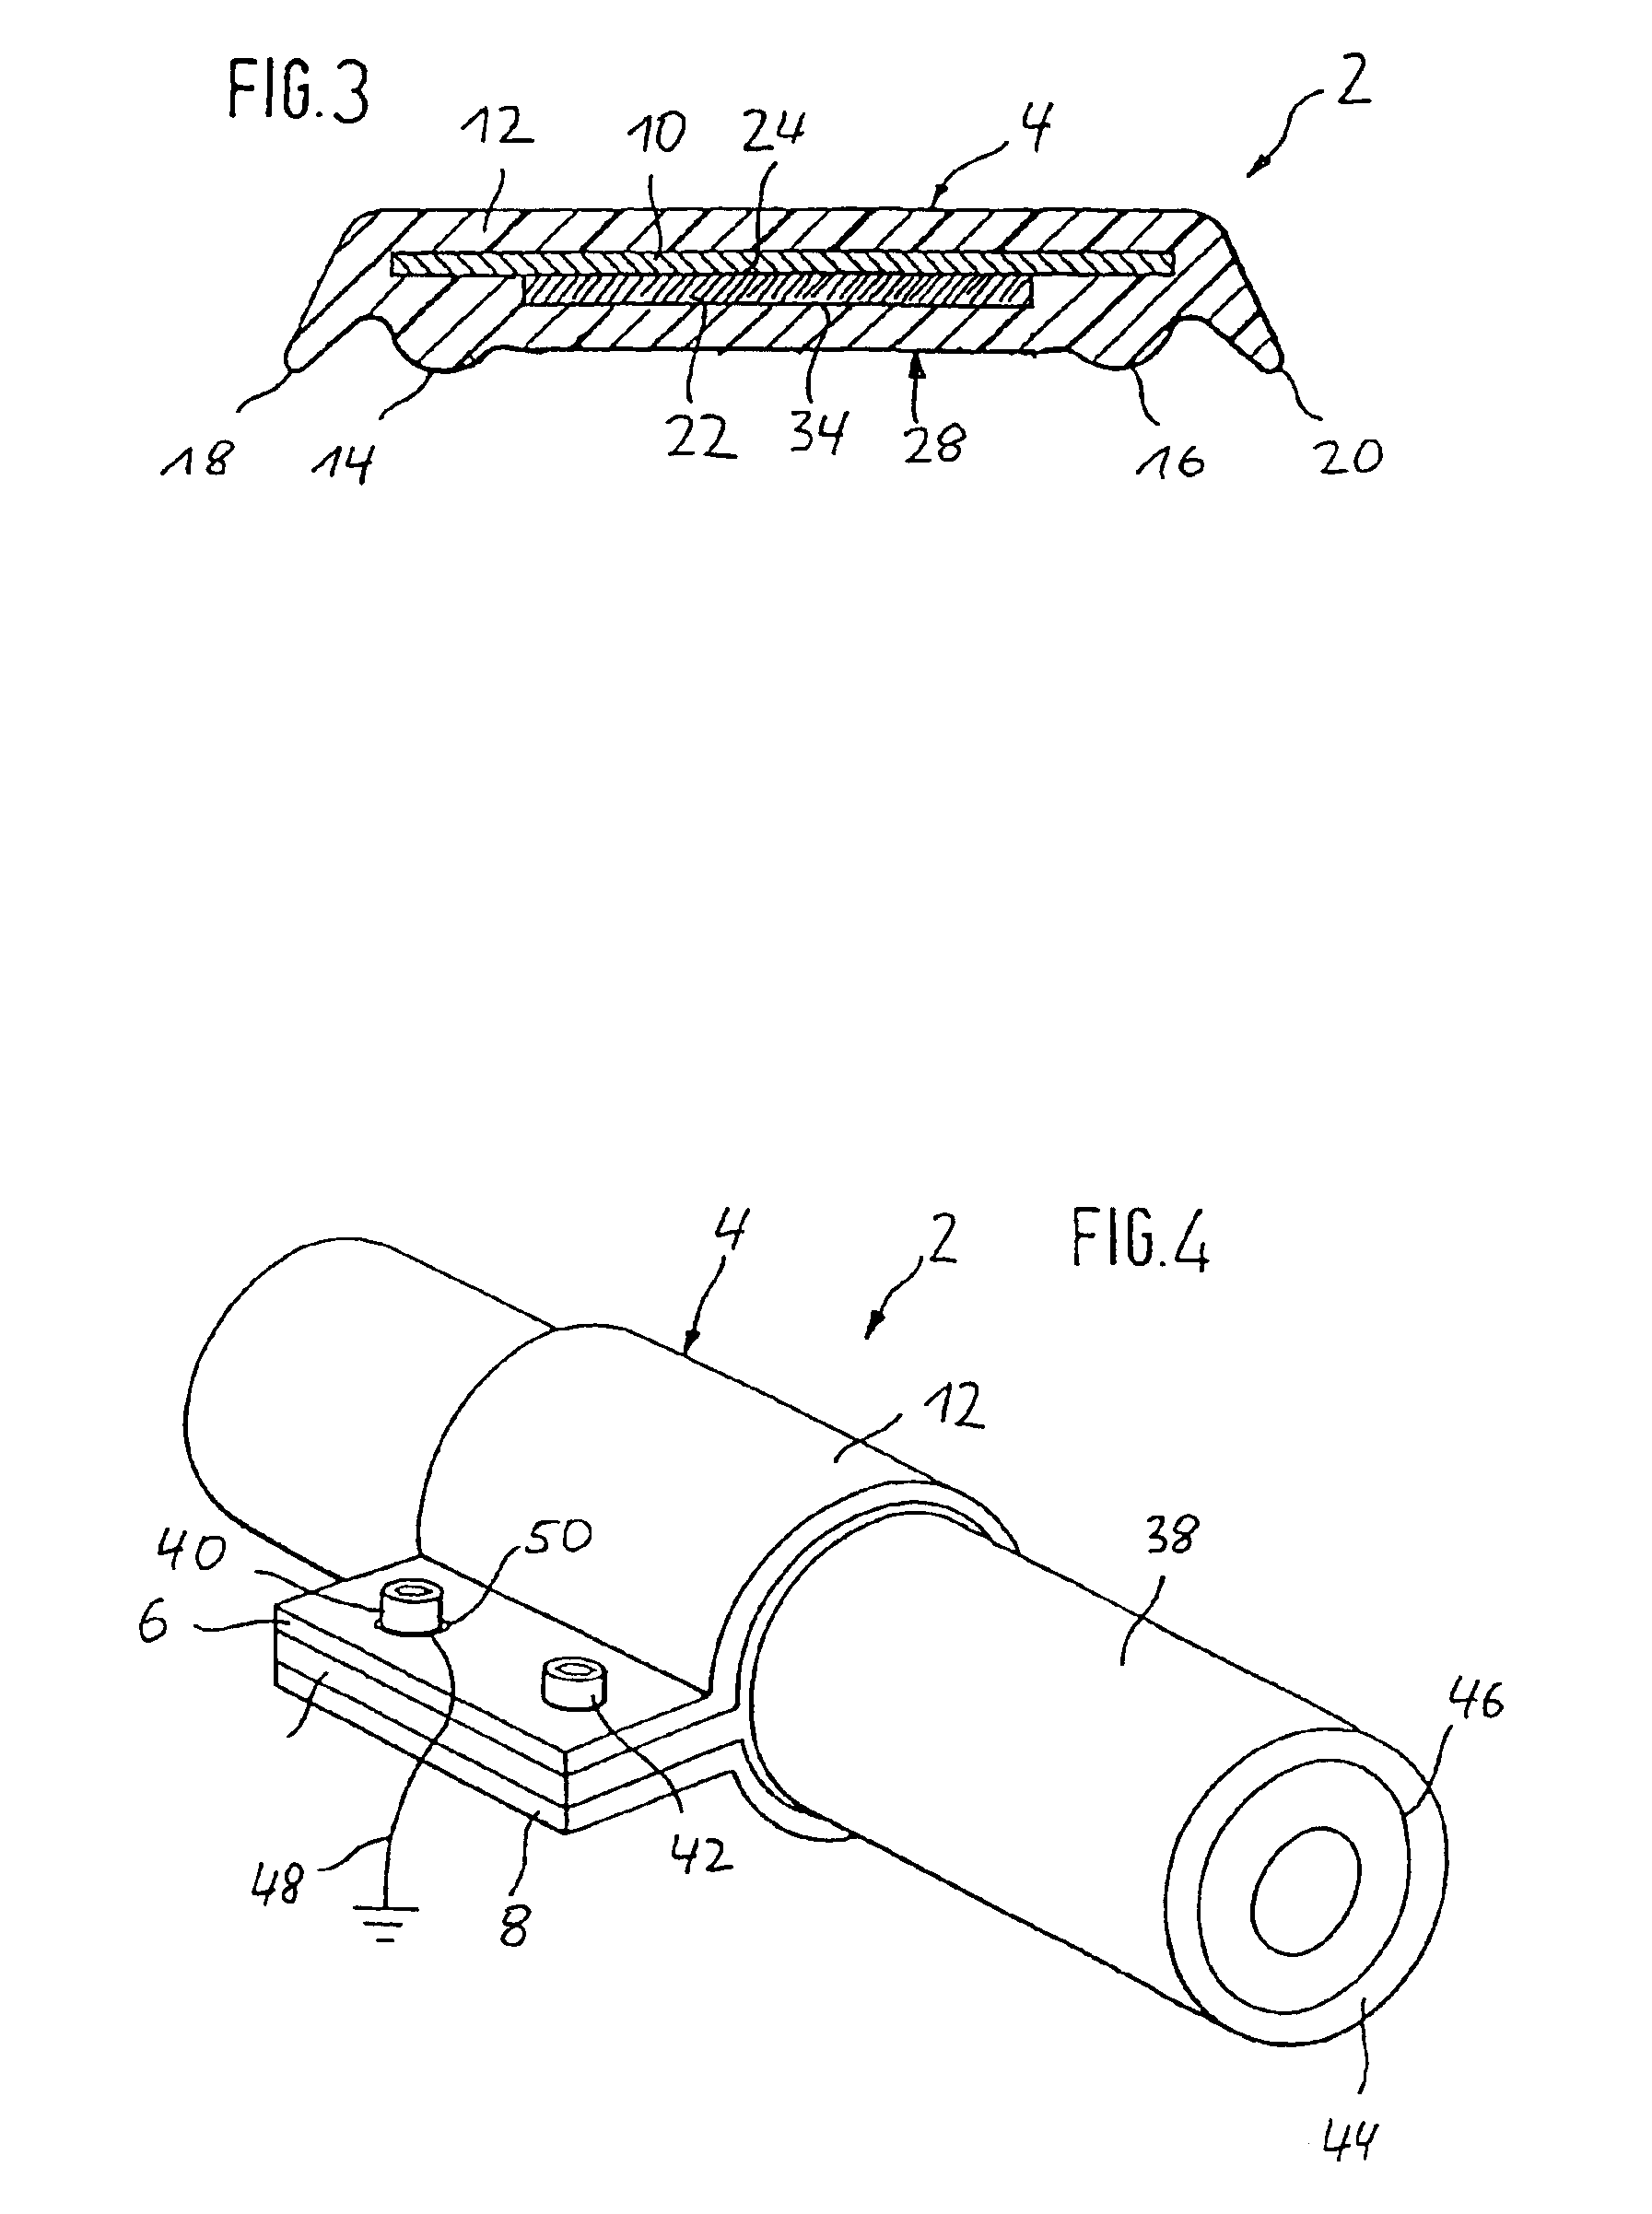 Electrically conductive pipe or cable clip